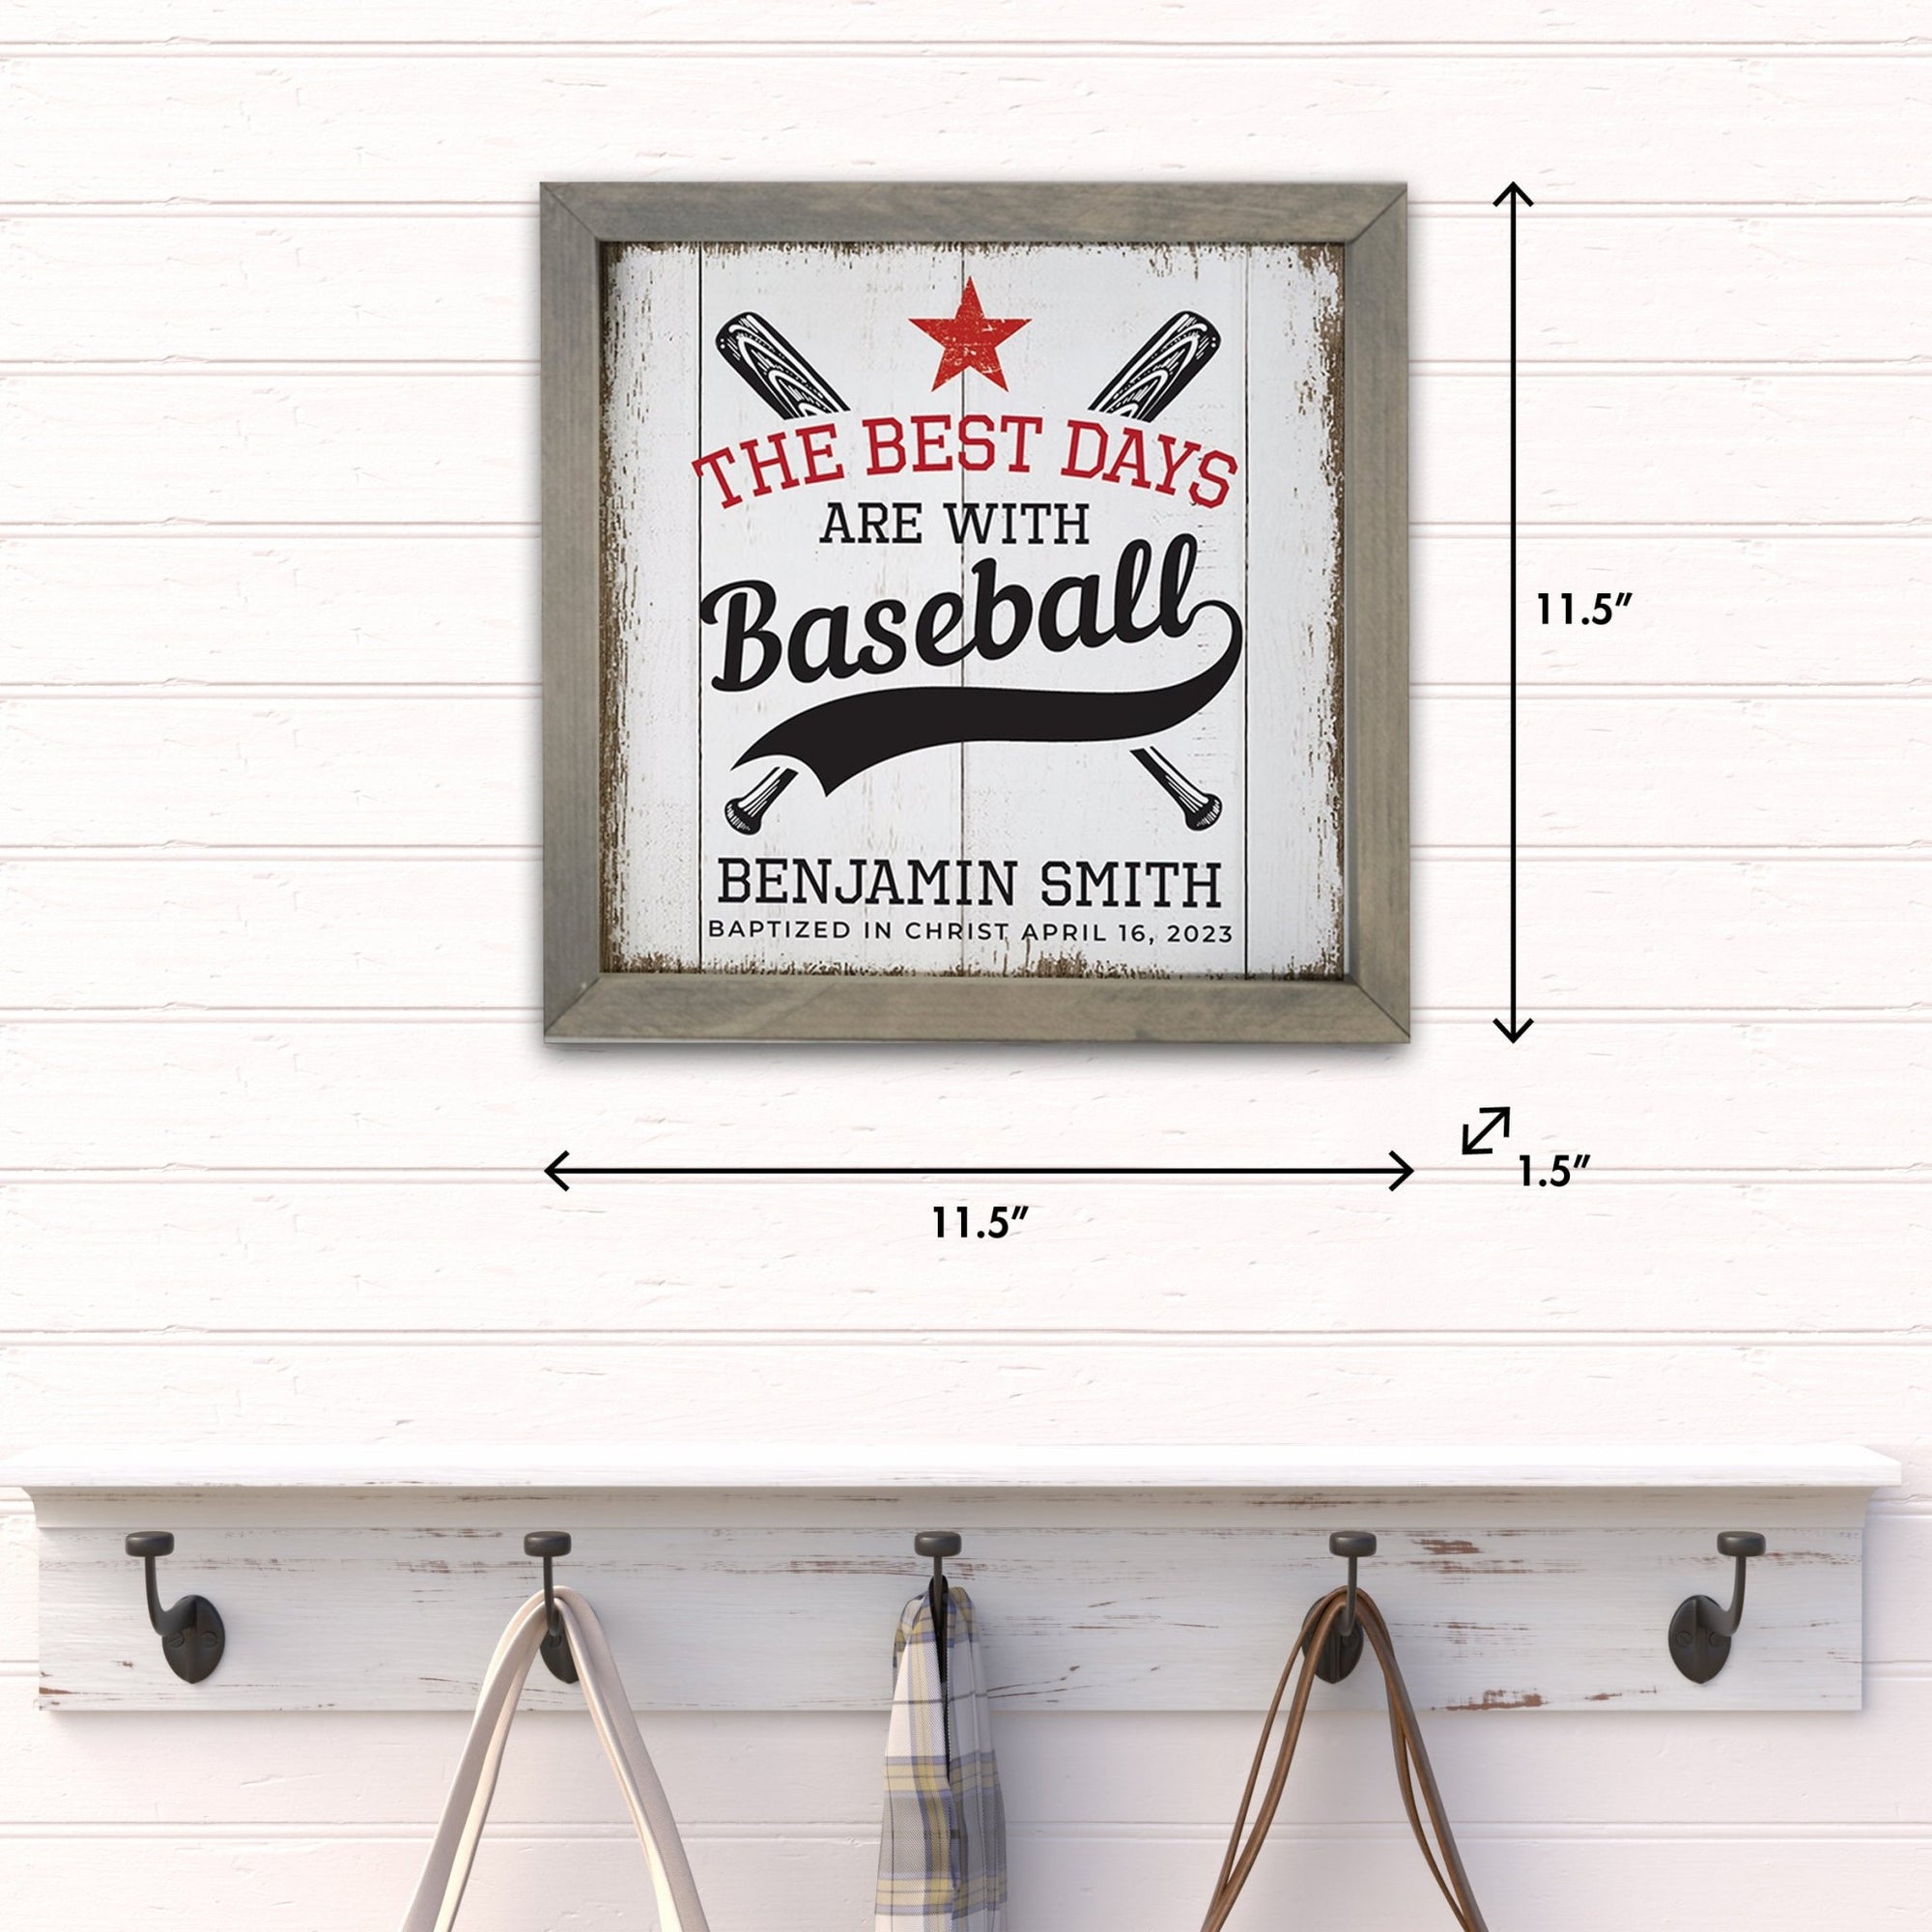 Personalized Elegant Baseball Framed Shadow Box Shelf Décor With Inspiring Bible Verses - The Best Days - LifeSong Milestones